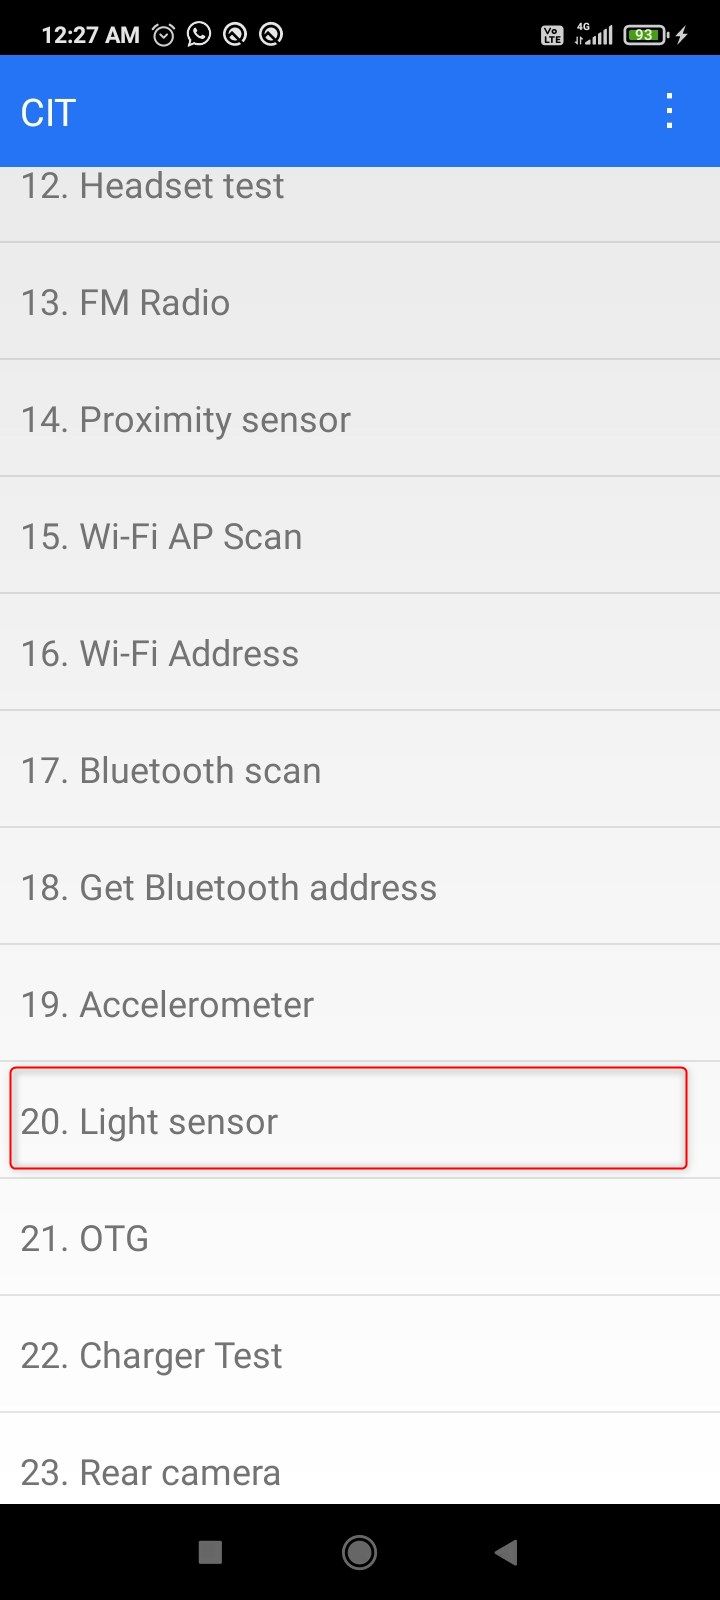 Triggering the light sensor test on Android.